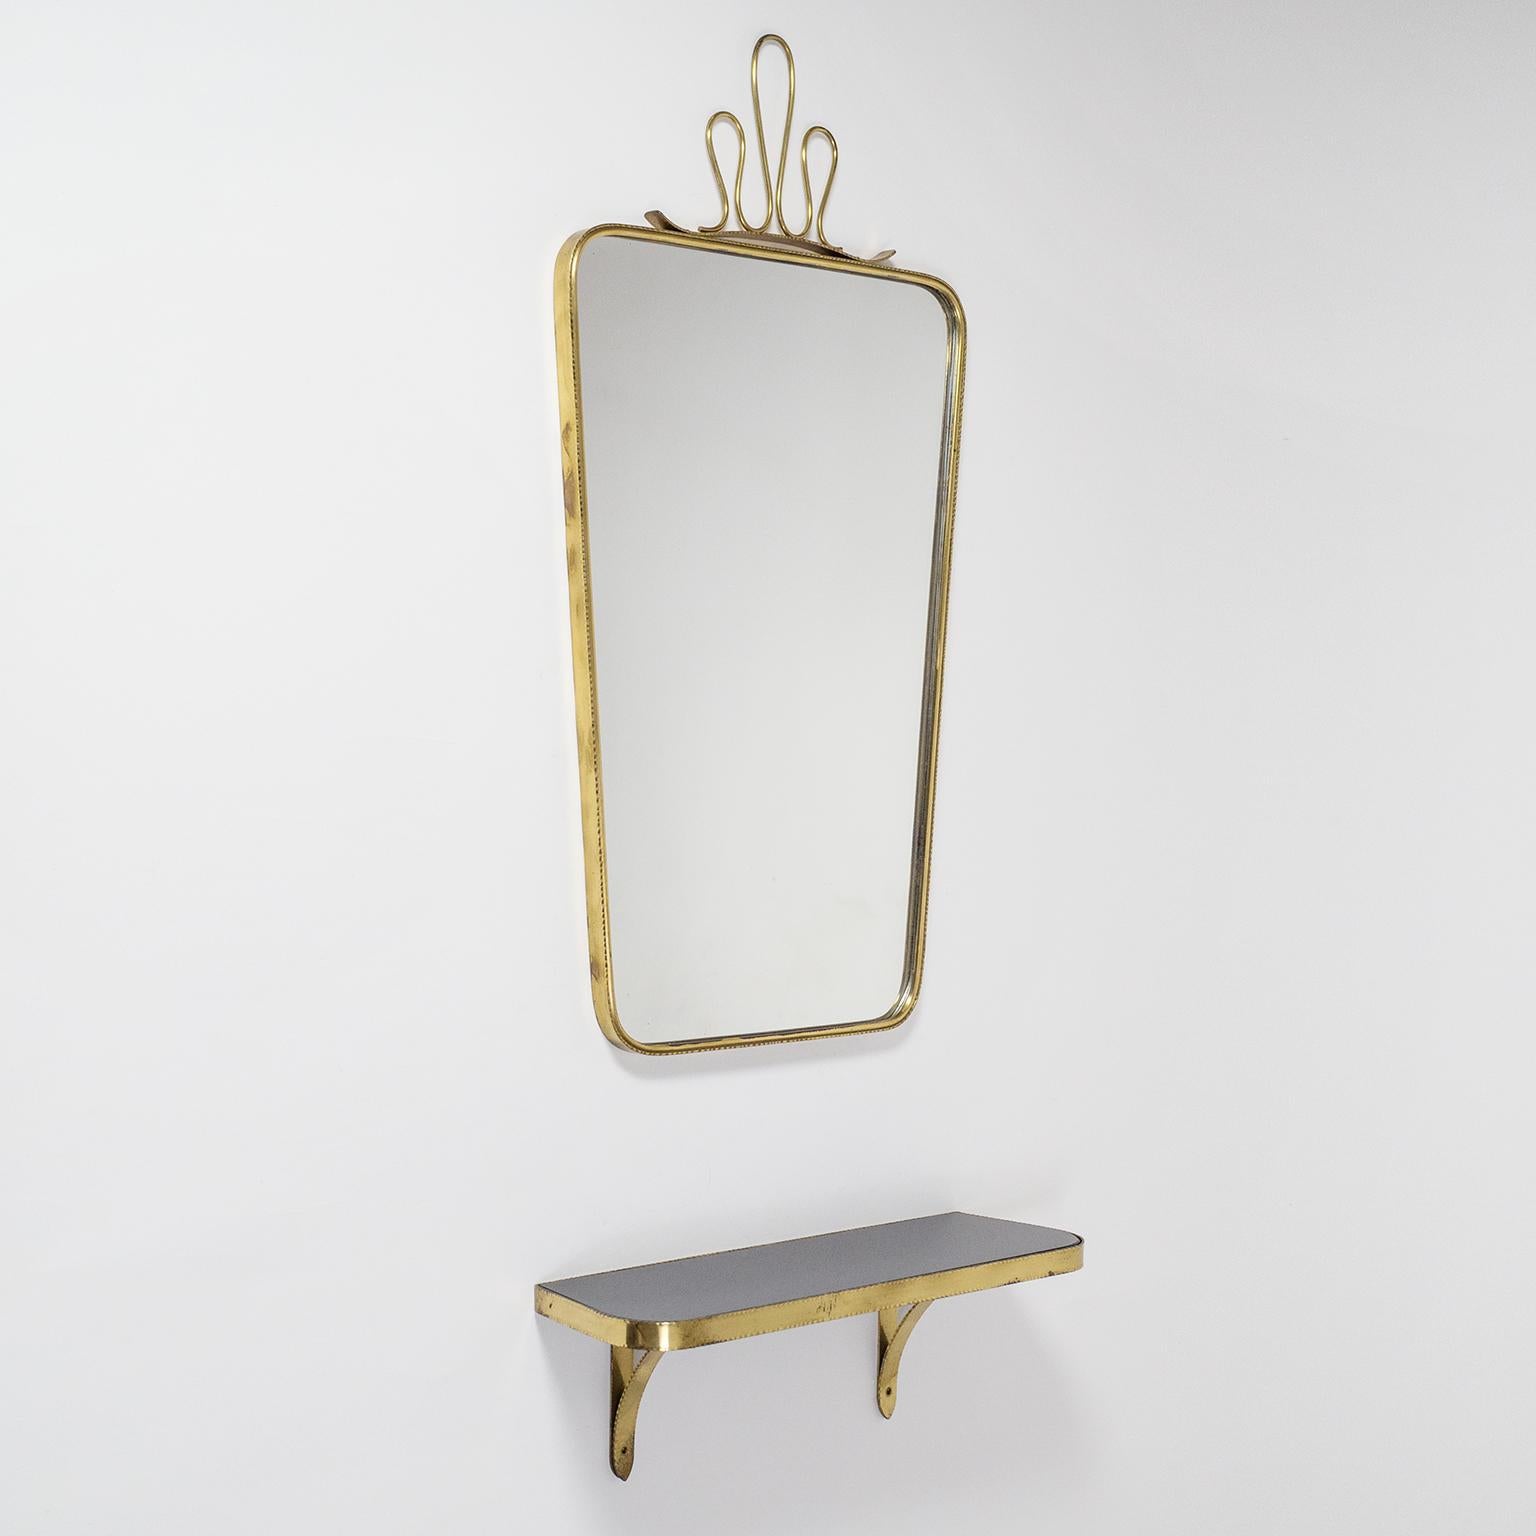 Charming 1950s brass wall mirror and console. Solid continuous brass frames with unusual hammered rims. The mirror with original glass has a large brass finial reminiscent of Gio Ponti designs. The wall console has a rare black opaline glass top.